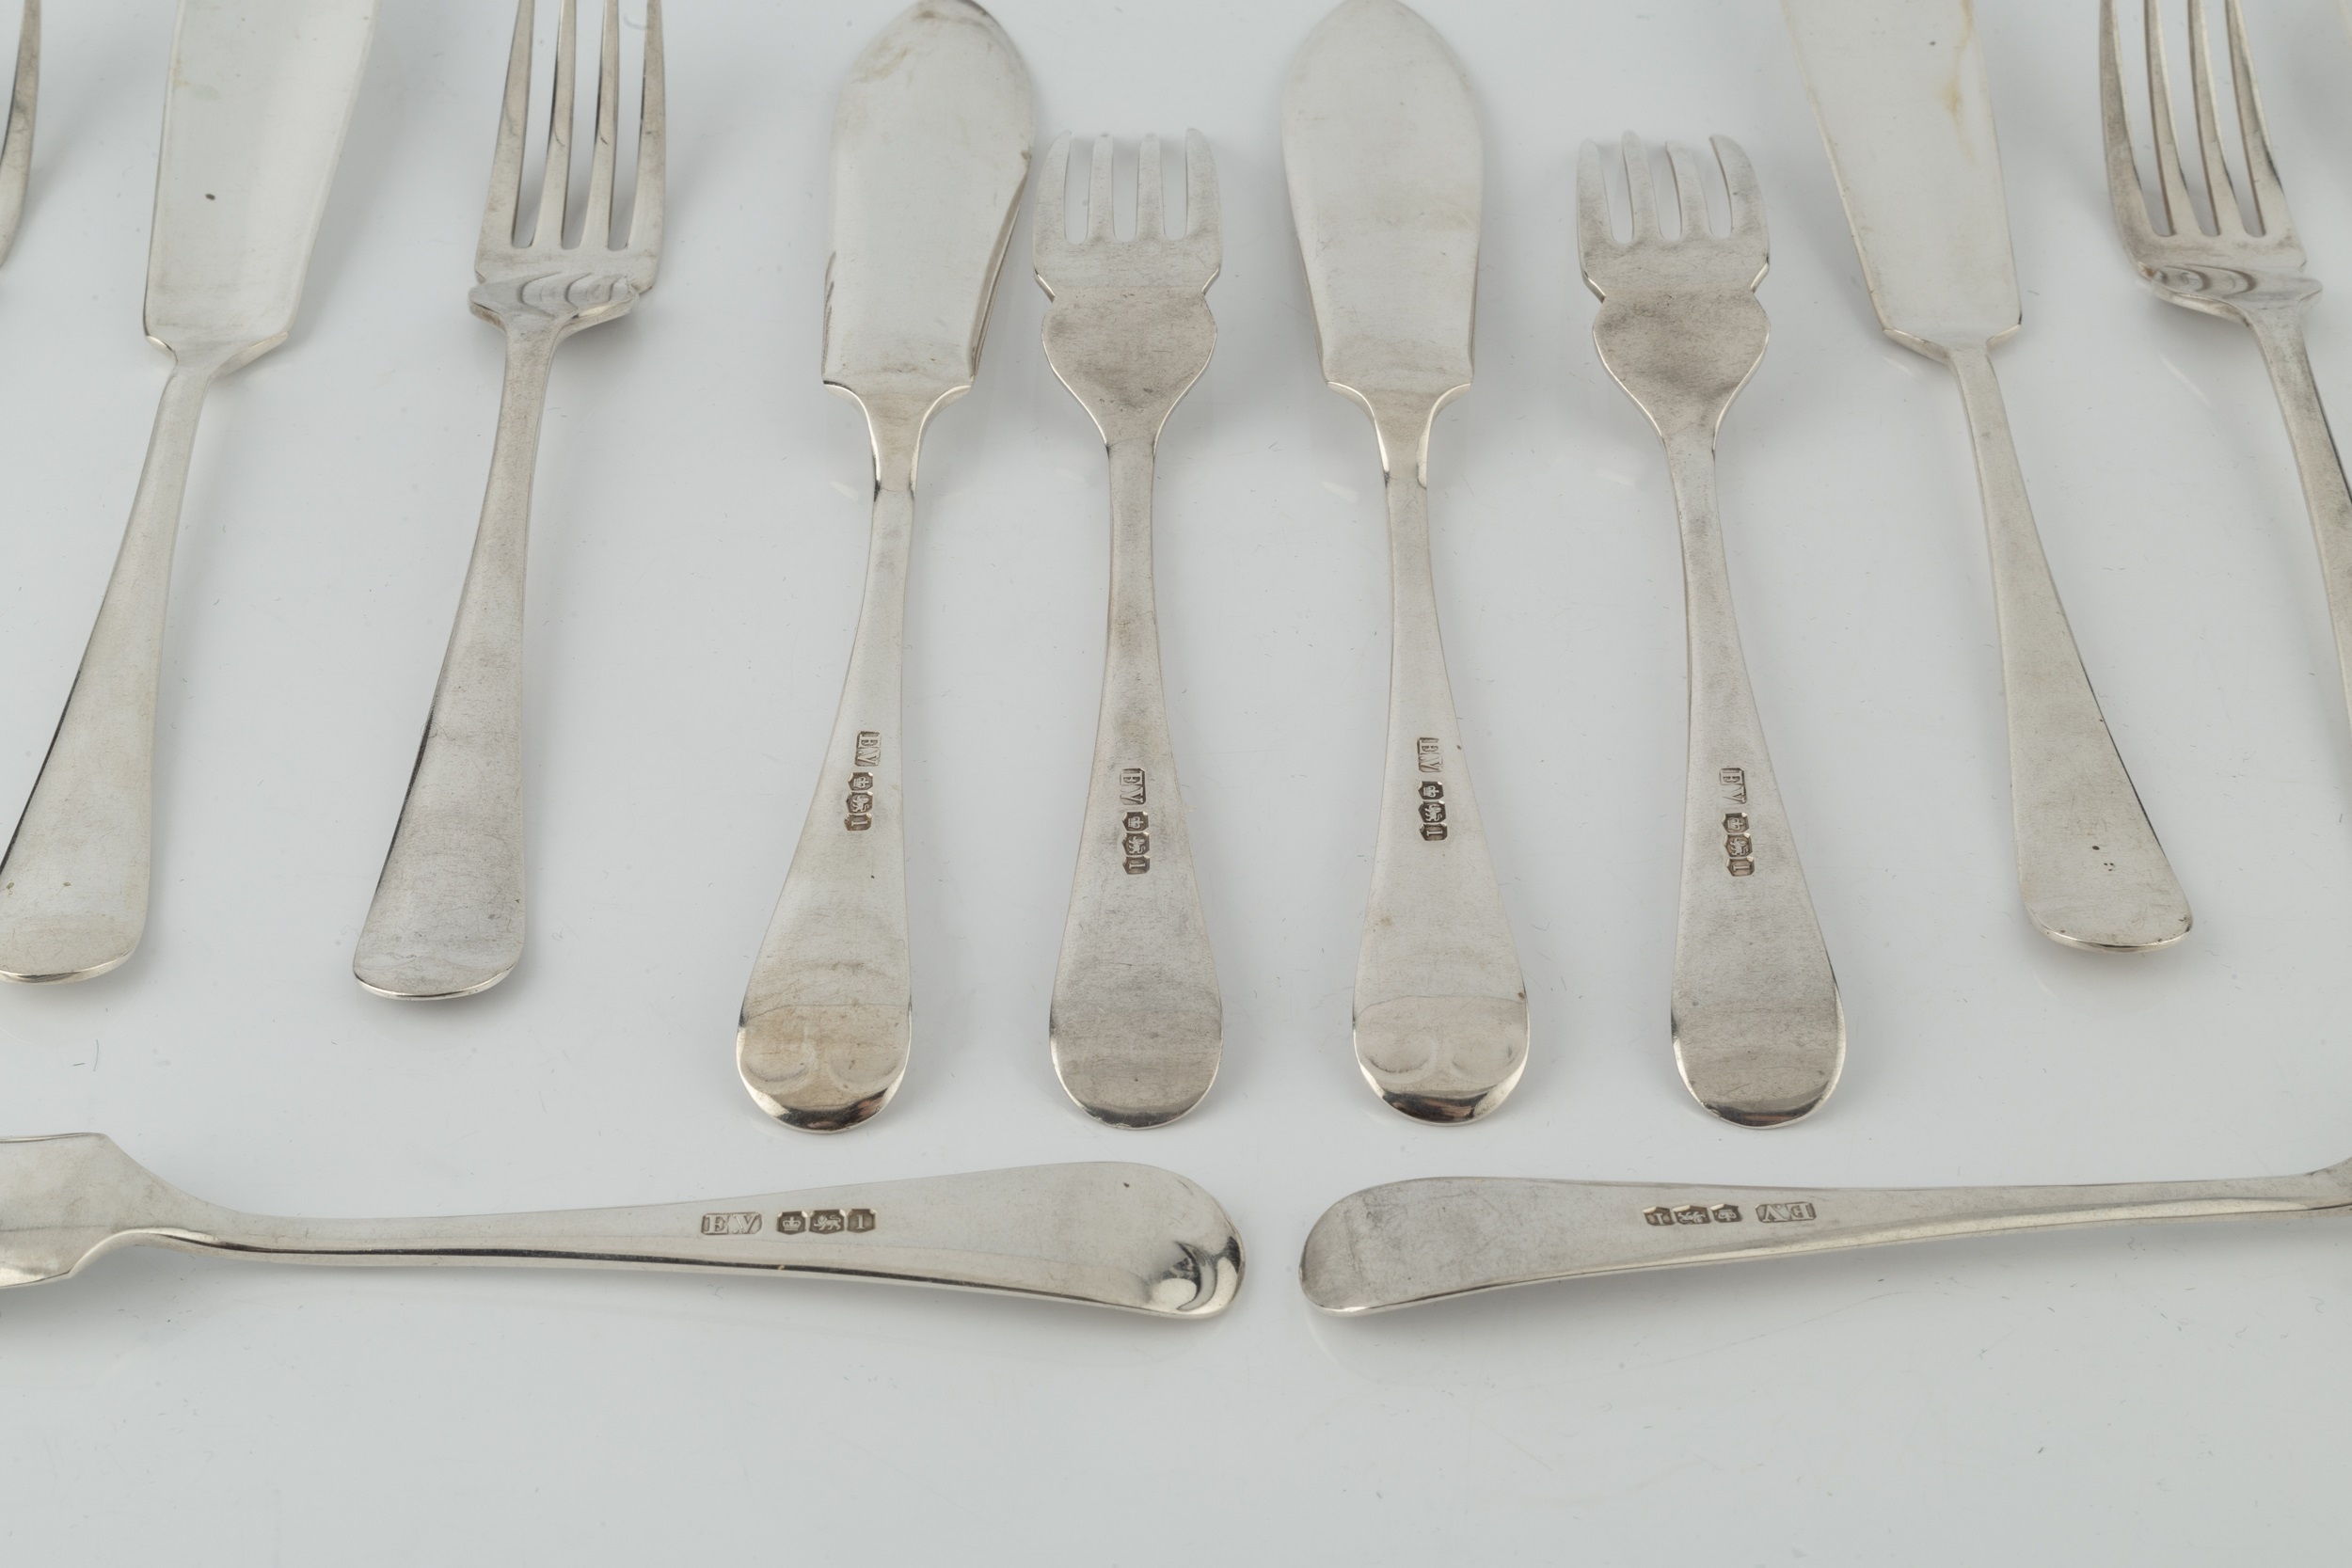 A set of six George V silver old English pattern fish knives and forks, by Viner's, Sheffield - Image 2 of 2